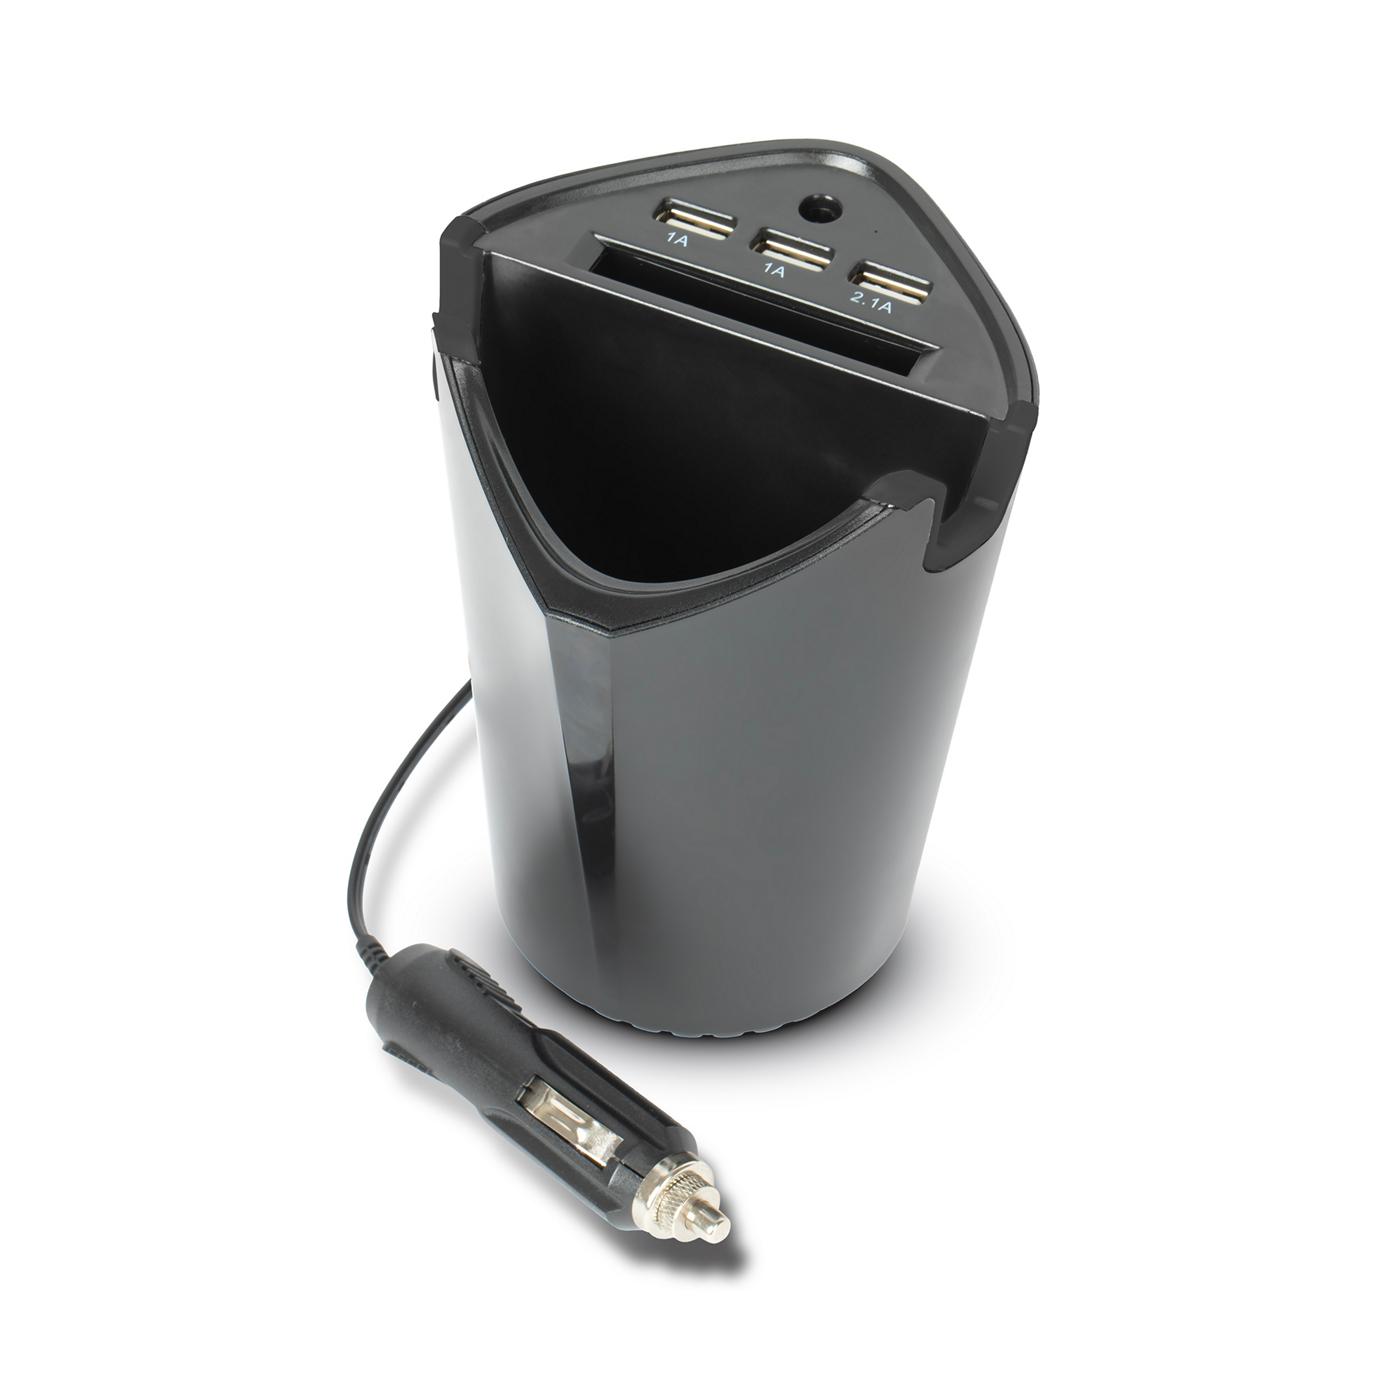 iHome Auto Cup Holder Charger - Black; image 2 of 2